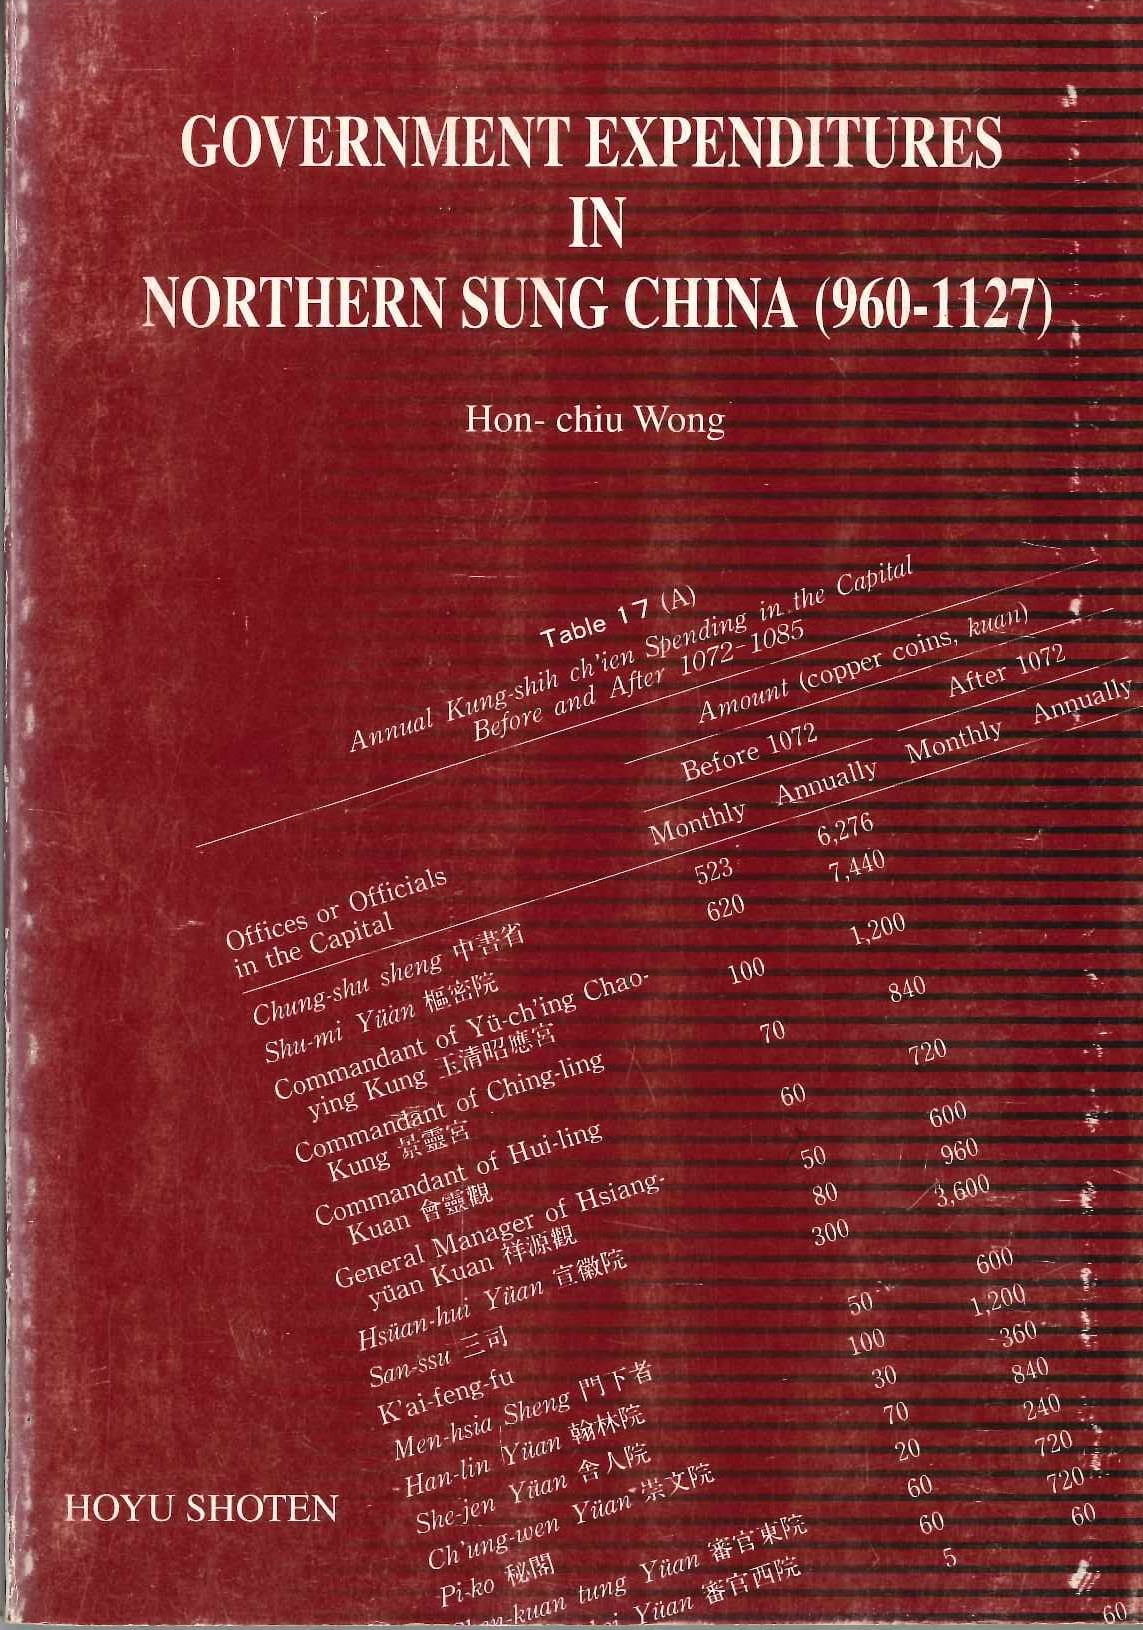 GOVERNMENT EXPENDITURES IN NORTHERN SUNG CHINA(960-1127)